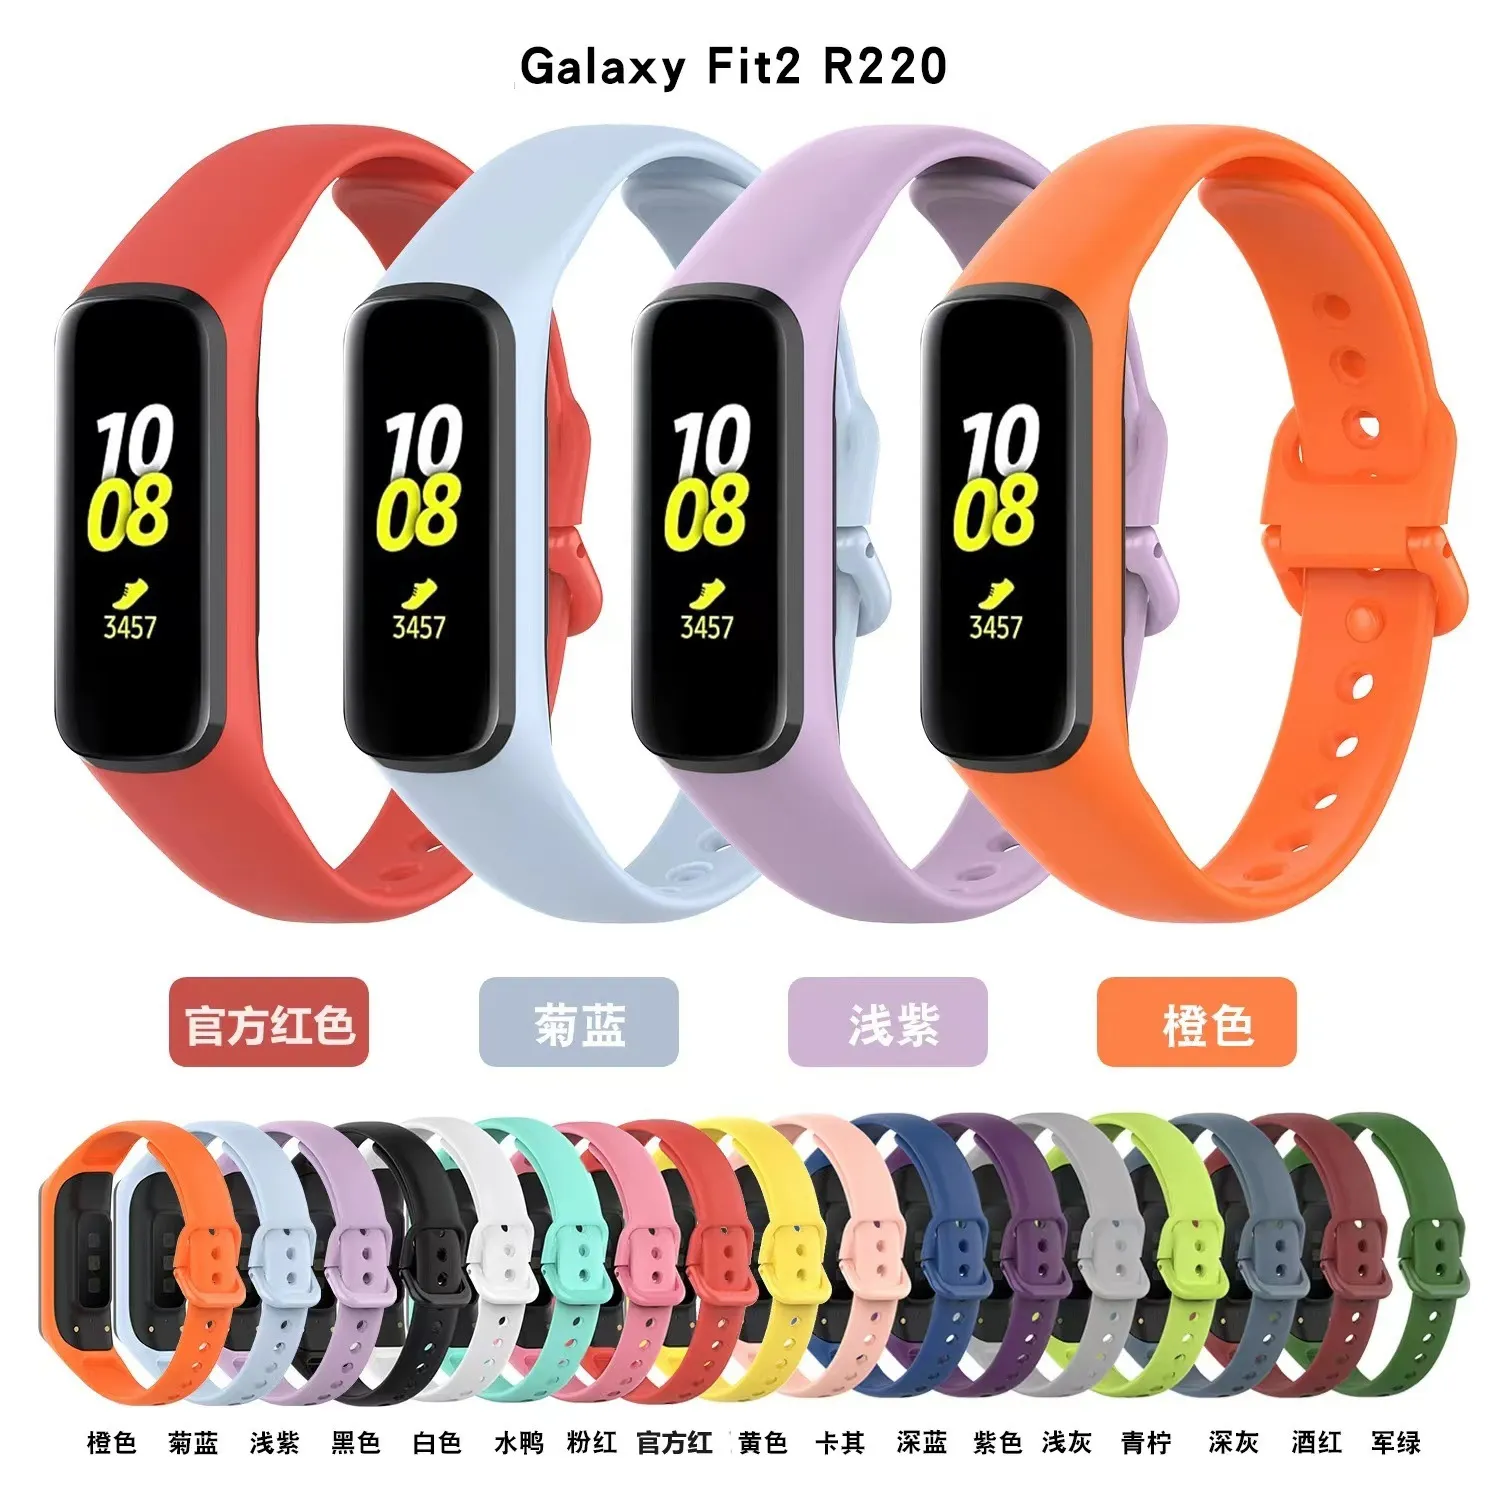 official strap buckle color consistent silicone strap For Samsung galaxy Fit 2 watch strap SM-R220 silicone watch bands